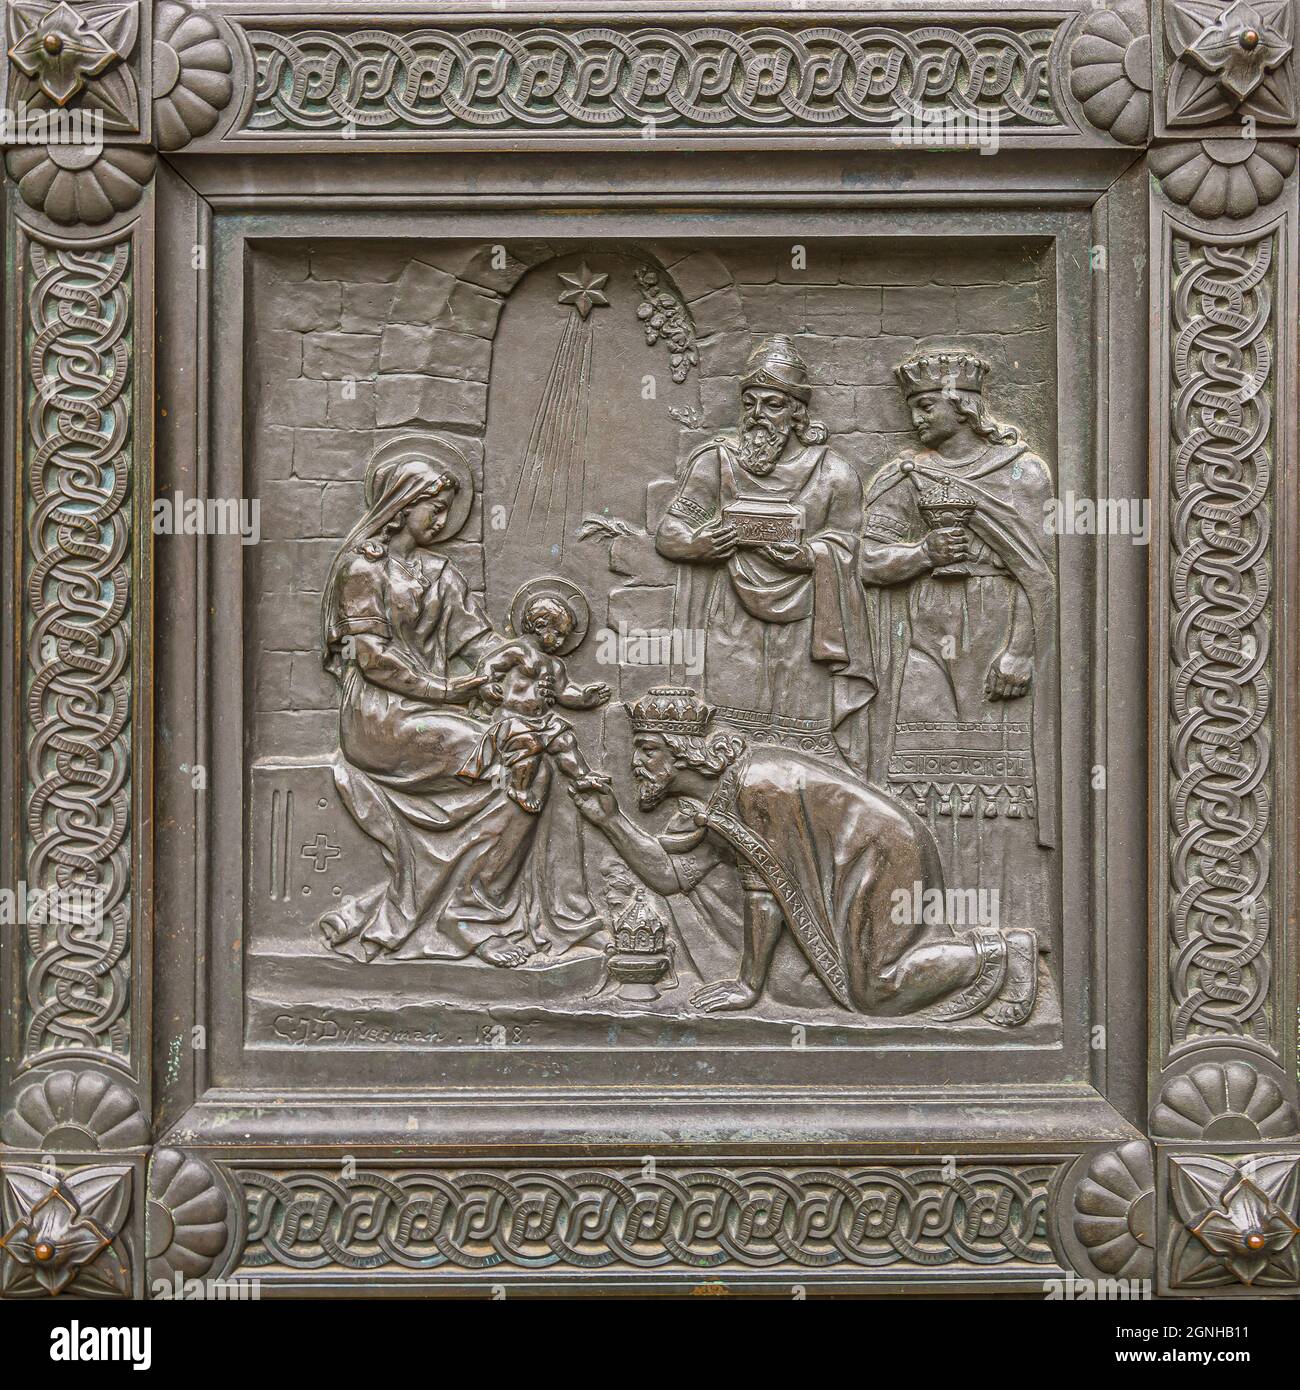 a bronze reliefe of the three vise men with their gifts to Jesus, a door in the cathedral of Lund, Sweden, September 11, 2021 Stock Photo